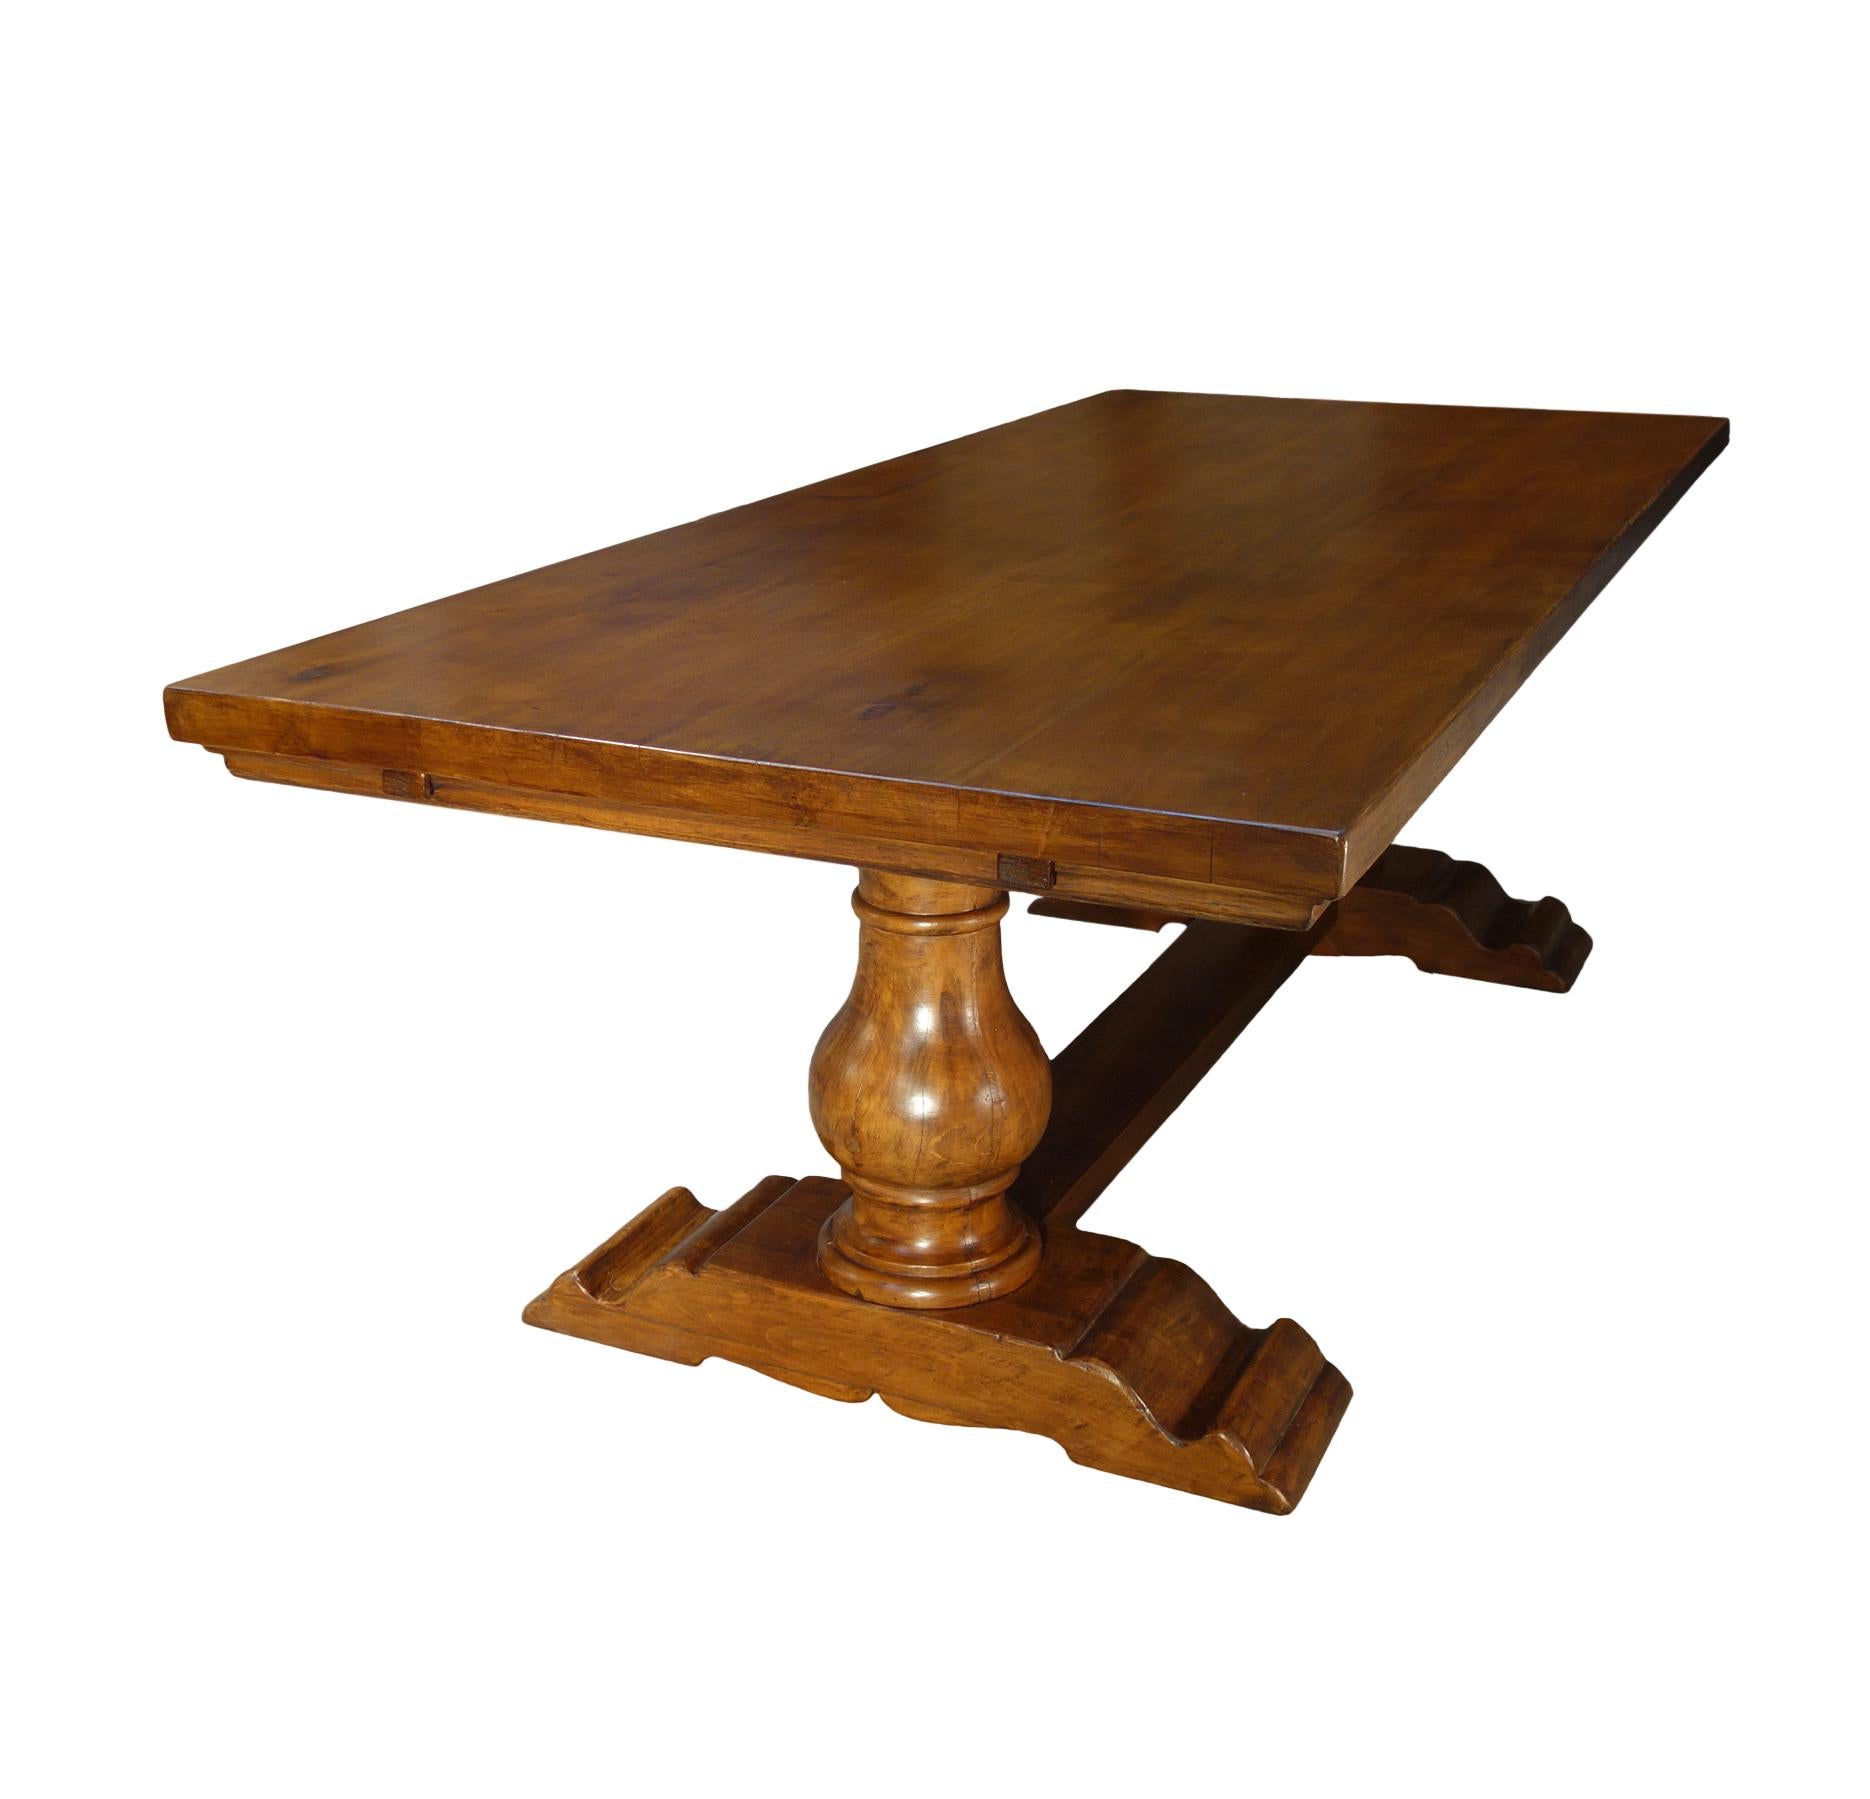 Hand-Crafted 18th C Style Italian Walnut BOCCI Trestle Extension Dining Table to order For Sale